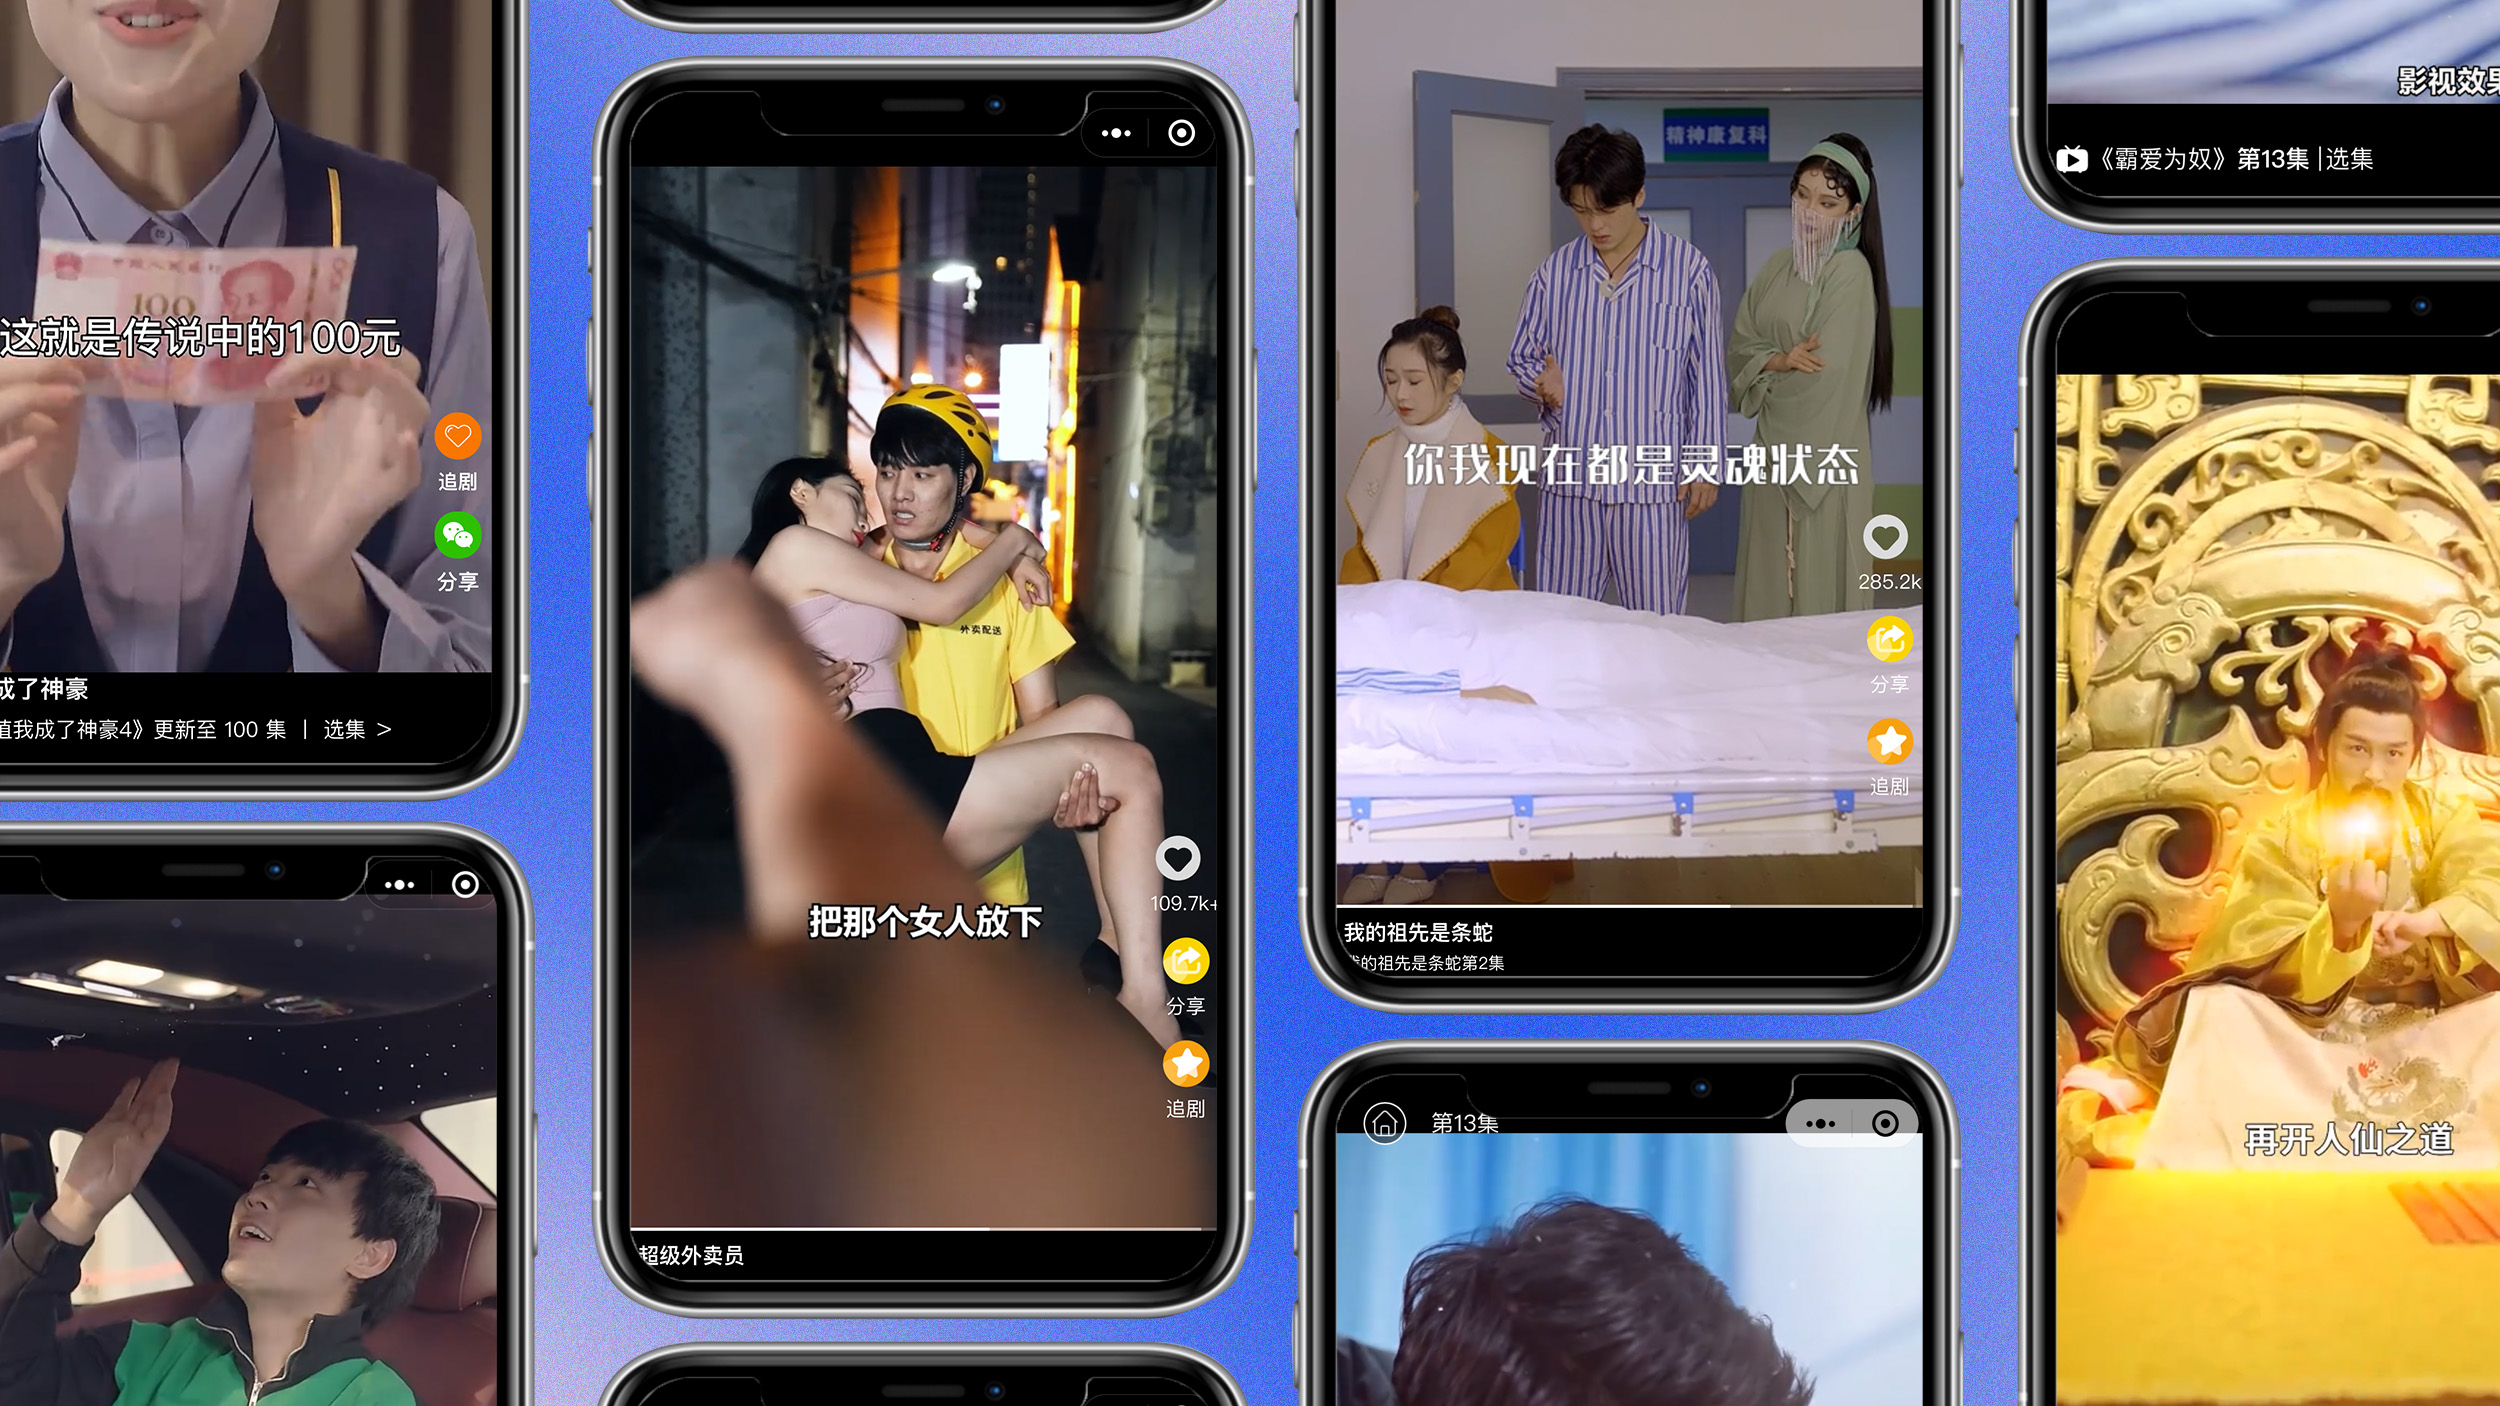 Chinese Sleeping Mom Sex - China's TikTok-style miniseries on WeChat are booming - Rest of World